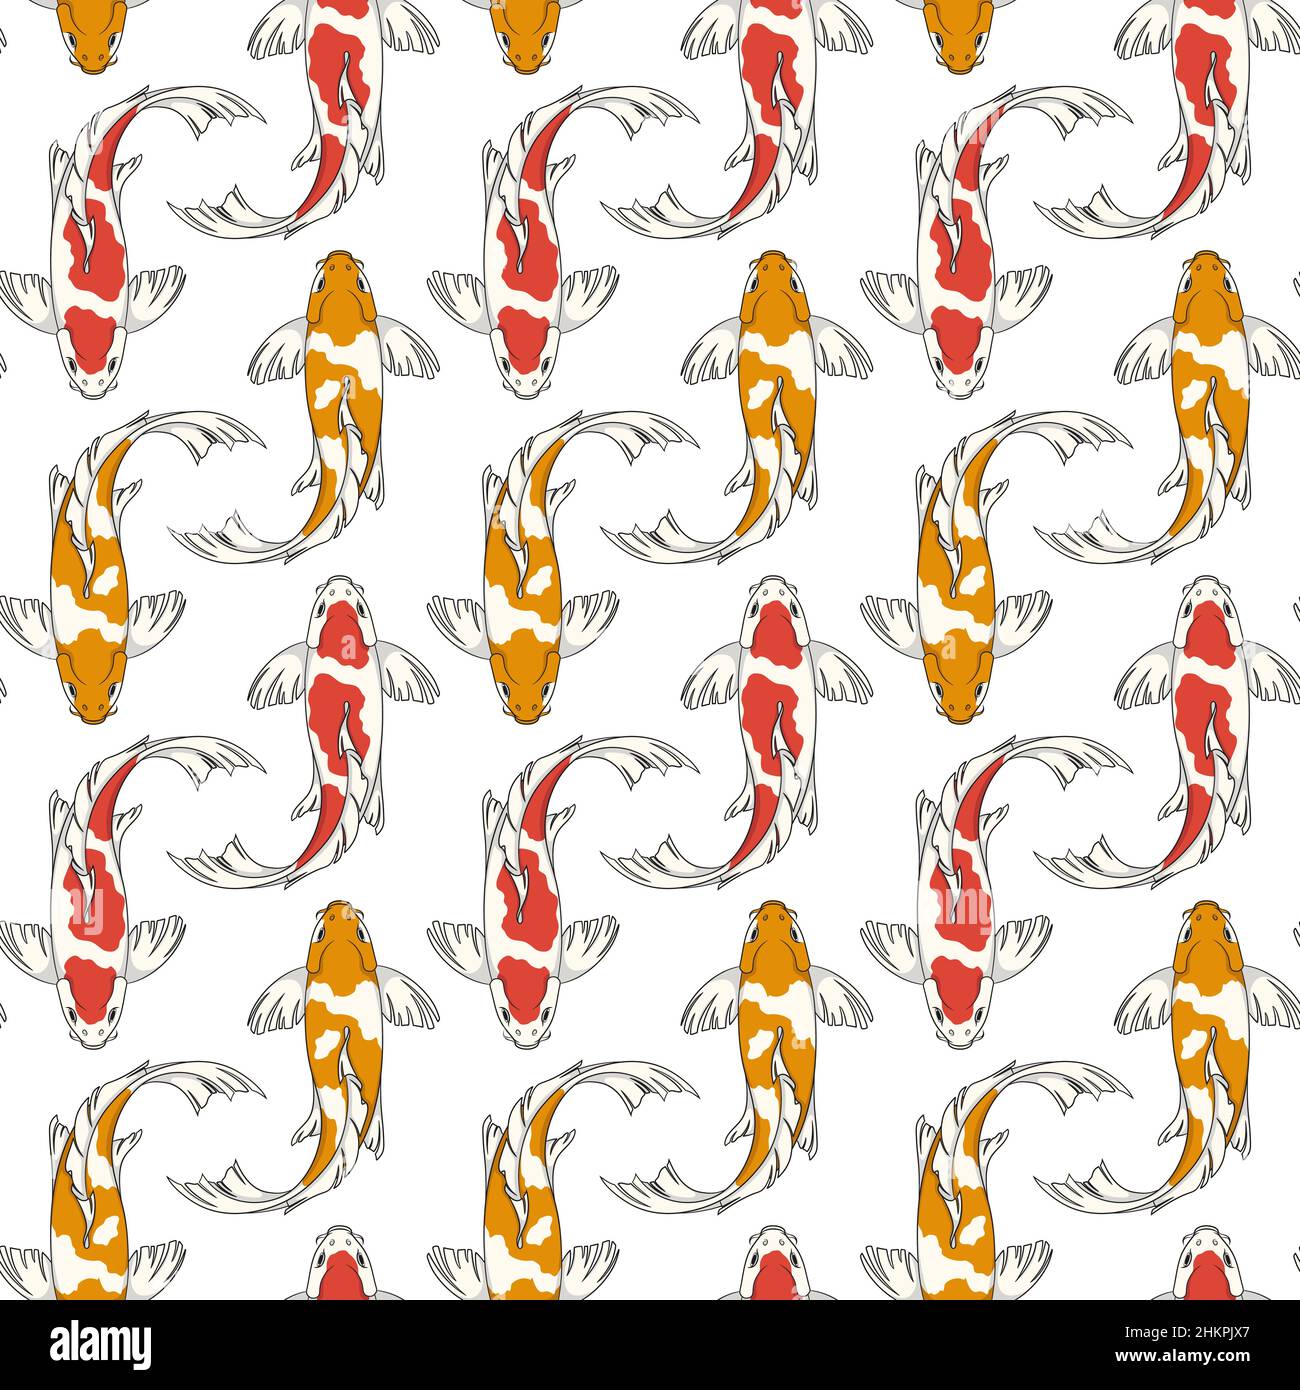 Seamless pattern with red and orange koi fish carps. Colored vector background. Stock Vector